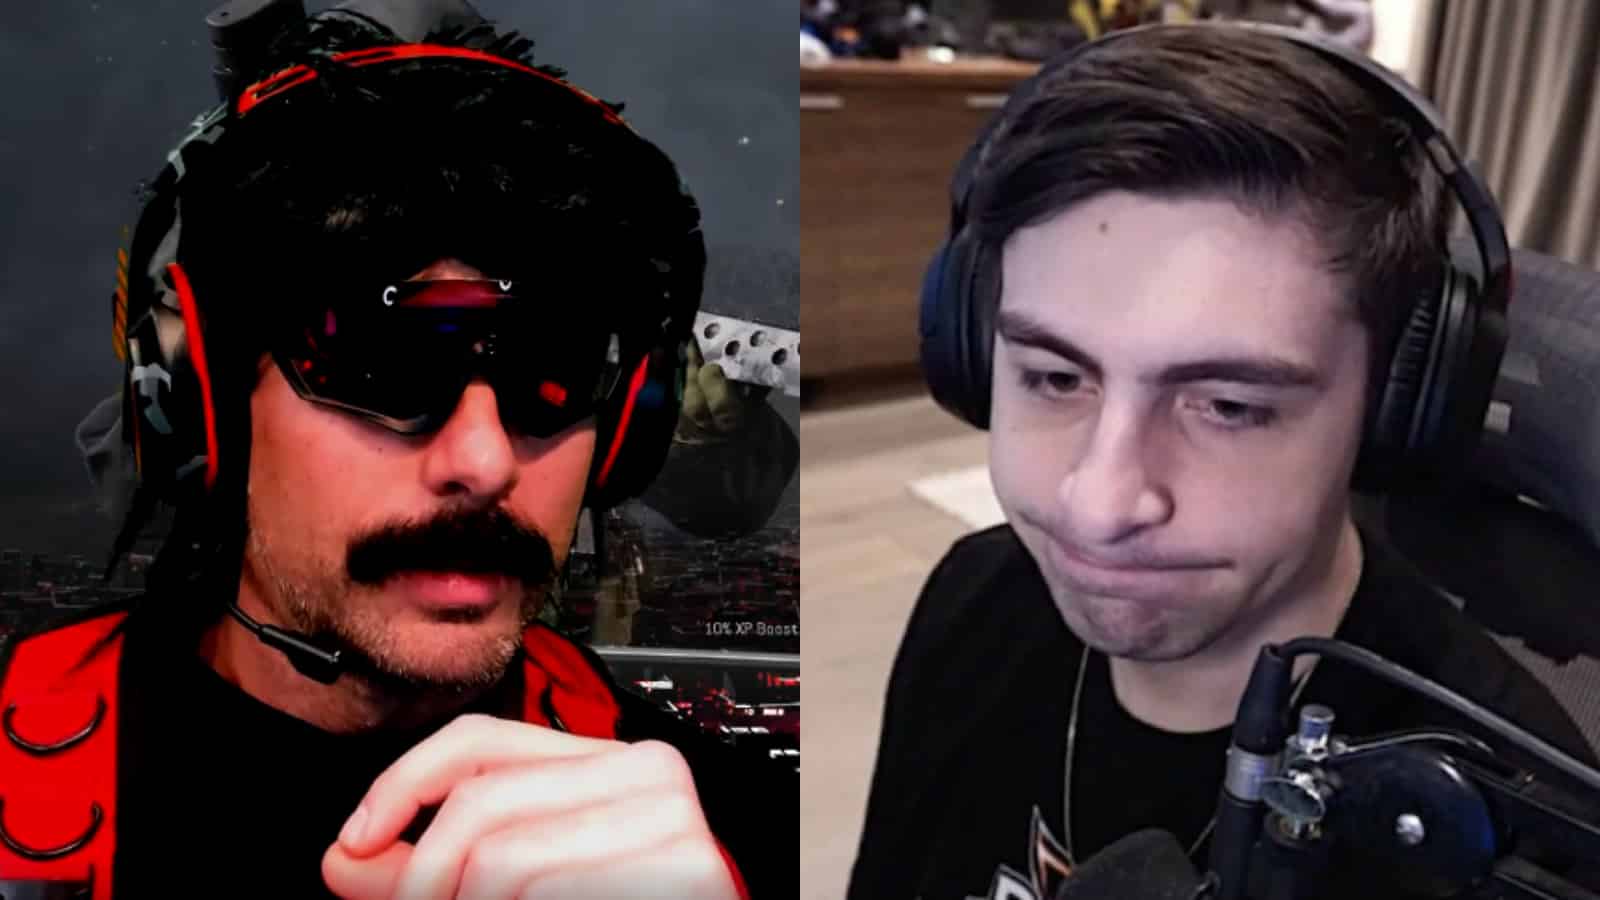 Dr Disrespect and shroud on twitch